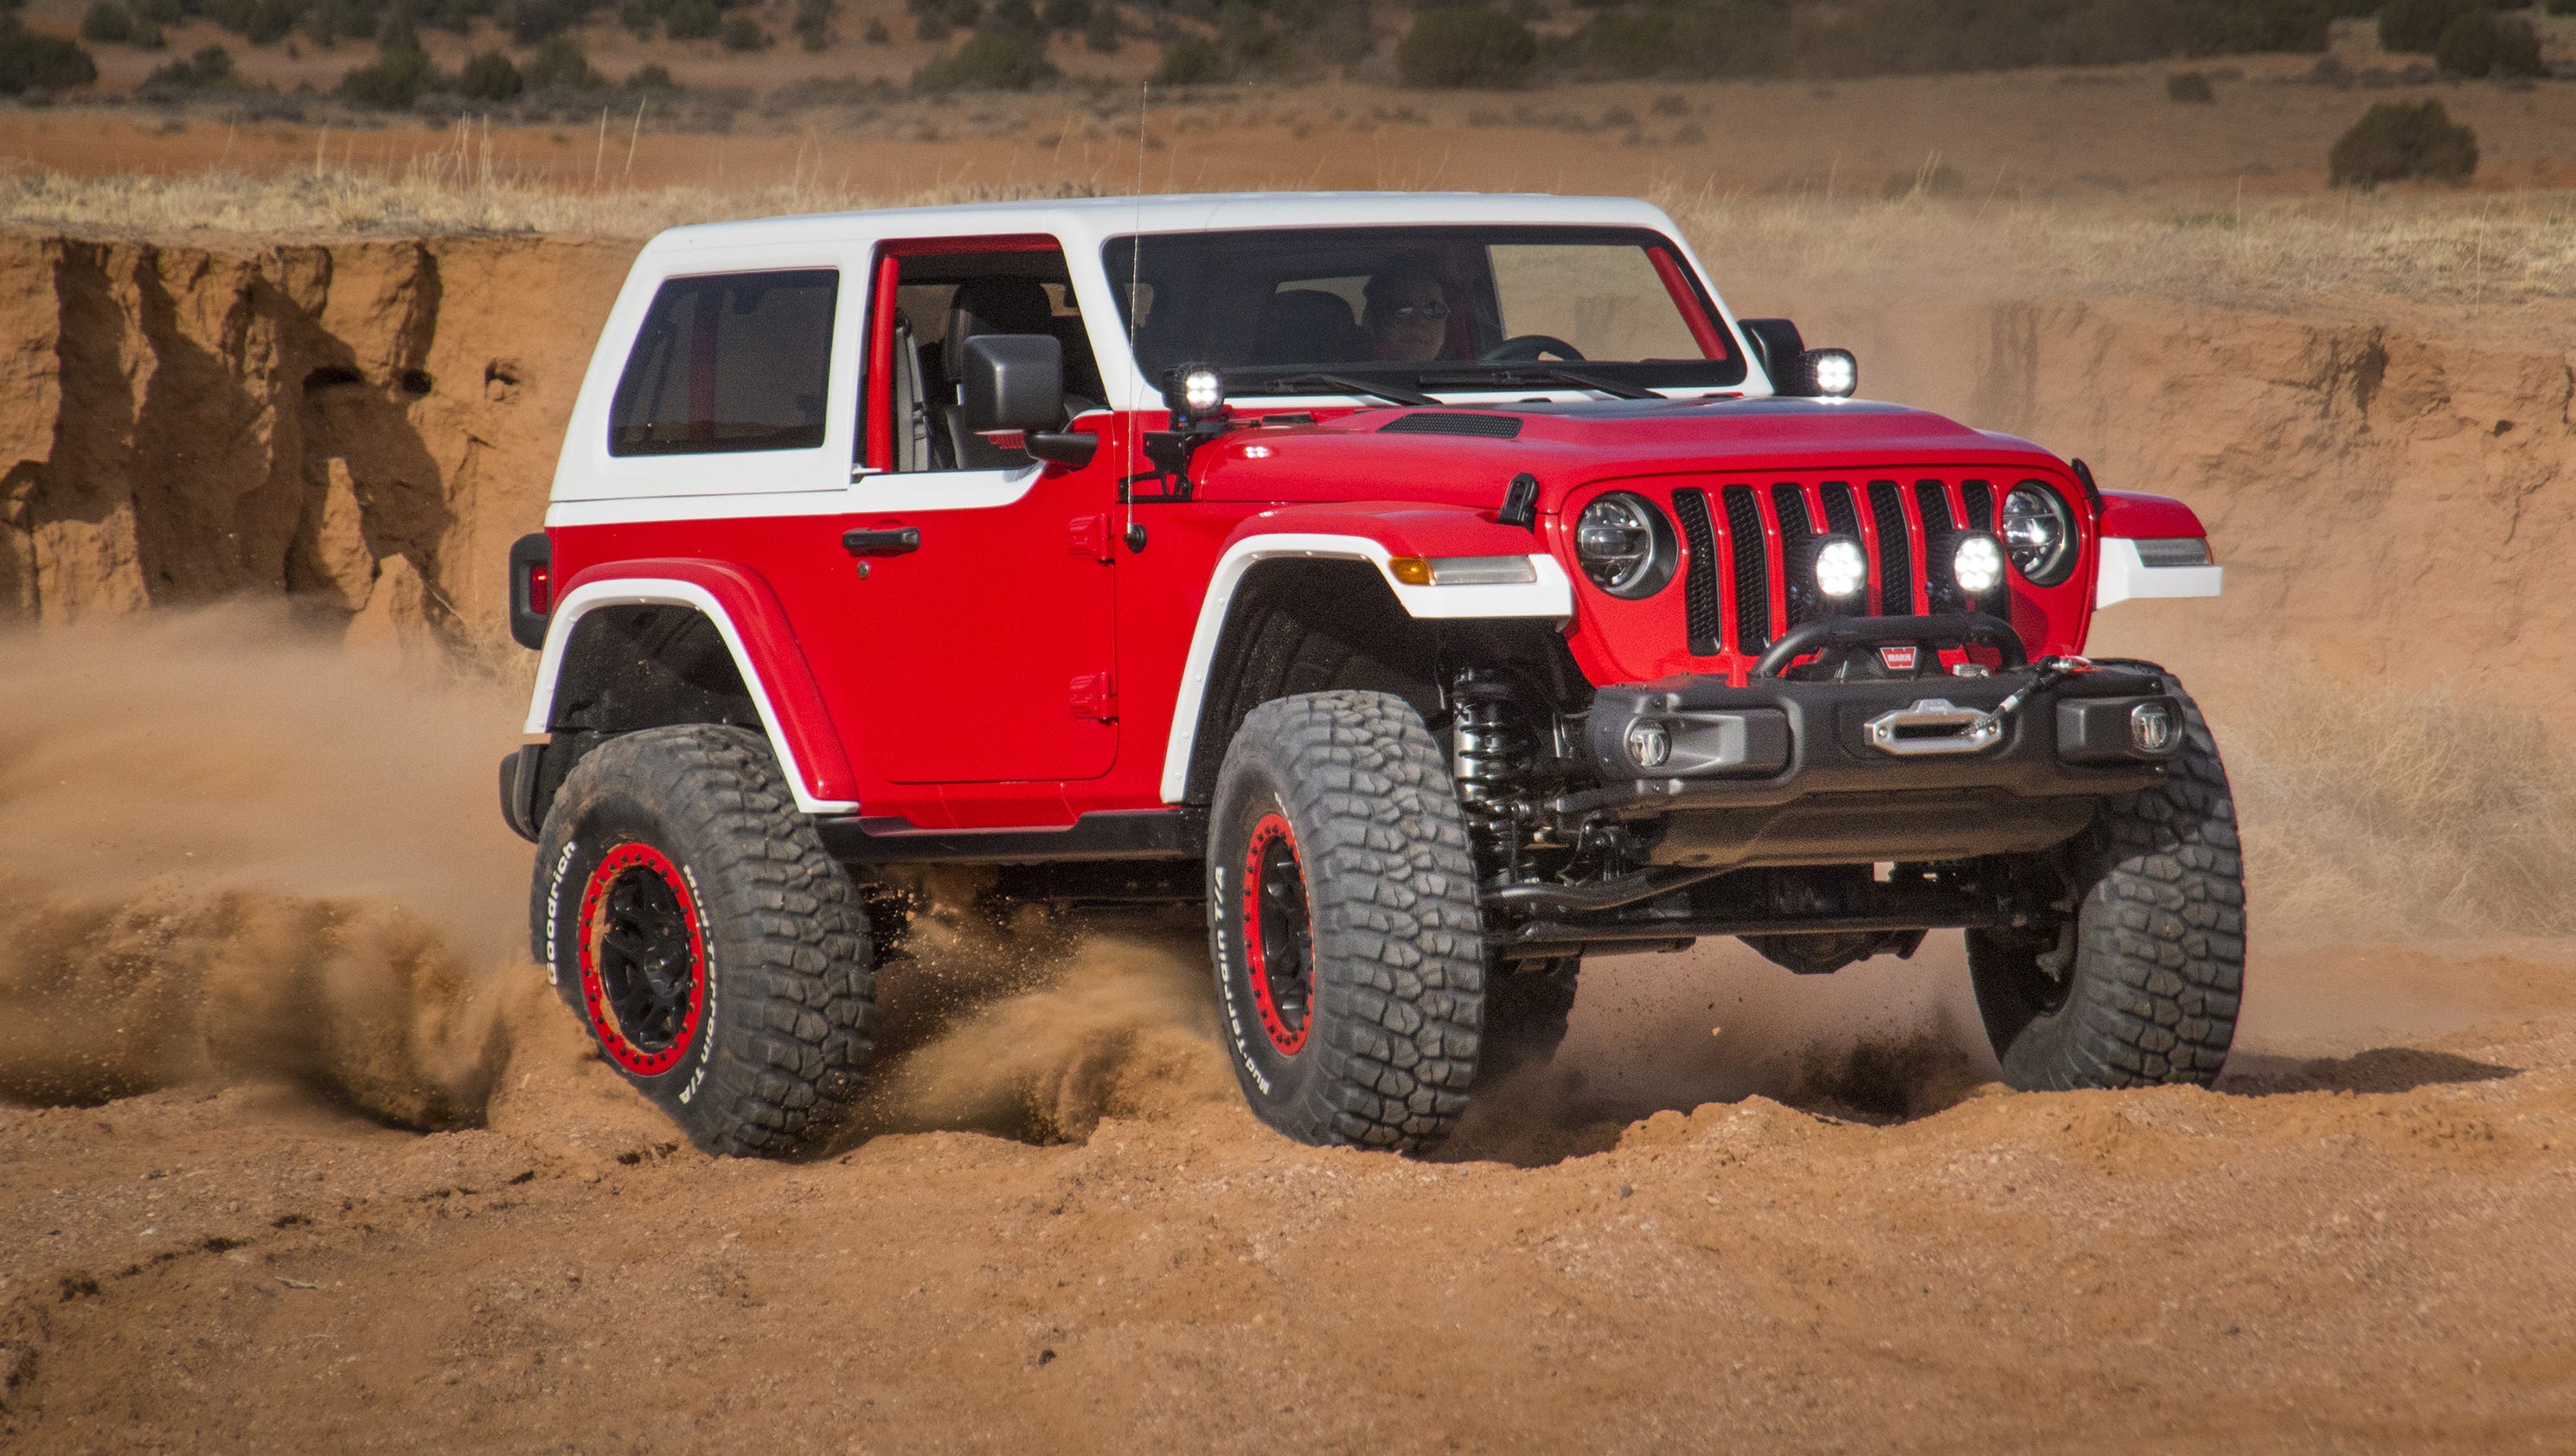 Jeep shows off its wild creations at Moab Easter gathering